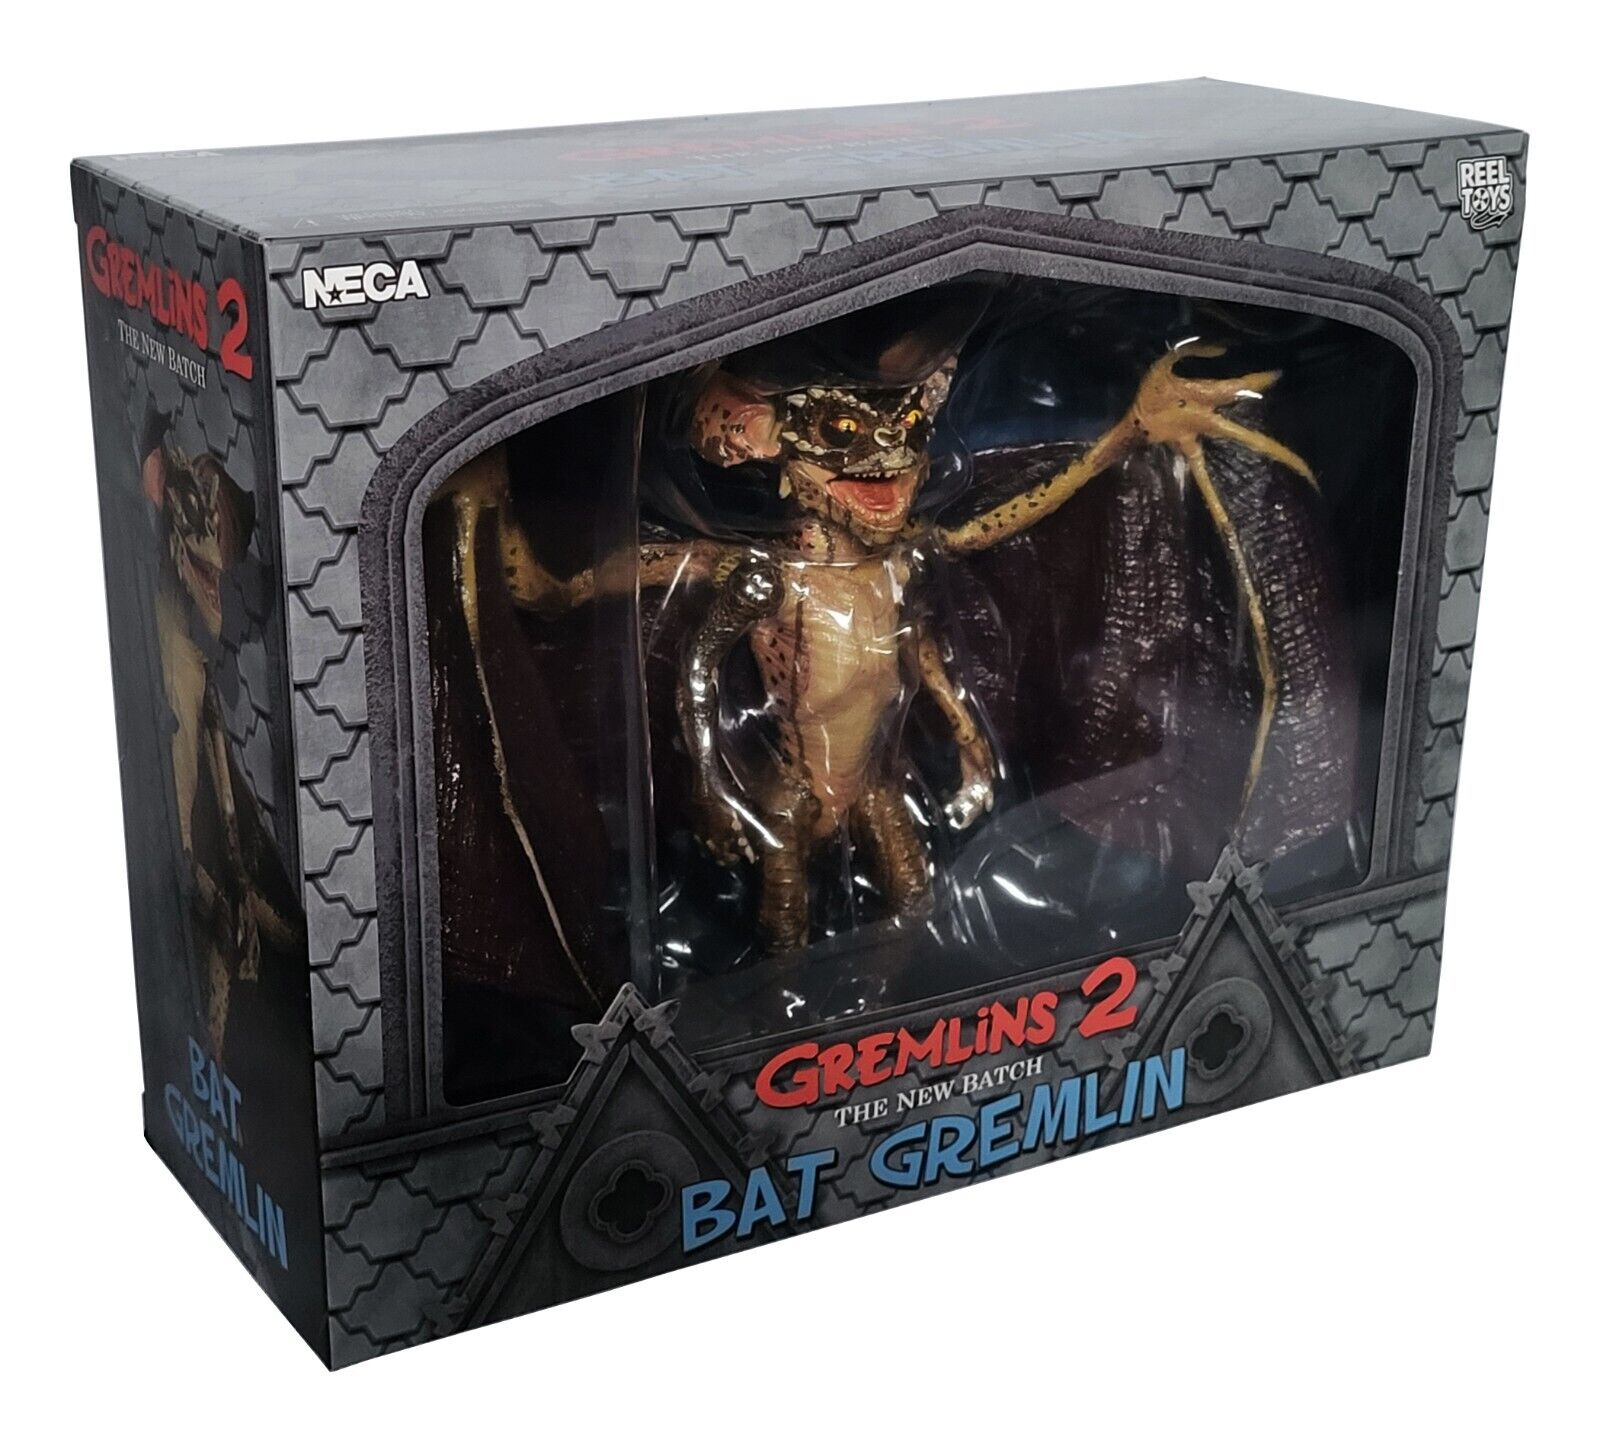 Bat Gremlin Deluxe Boxed The New Batch Action Figure 30757